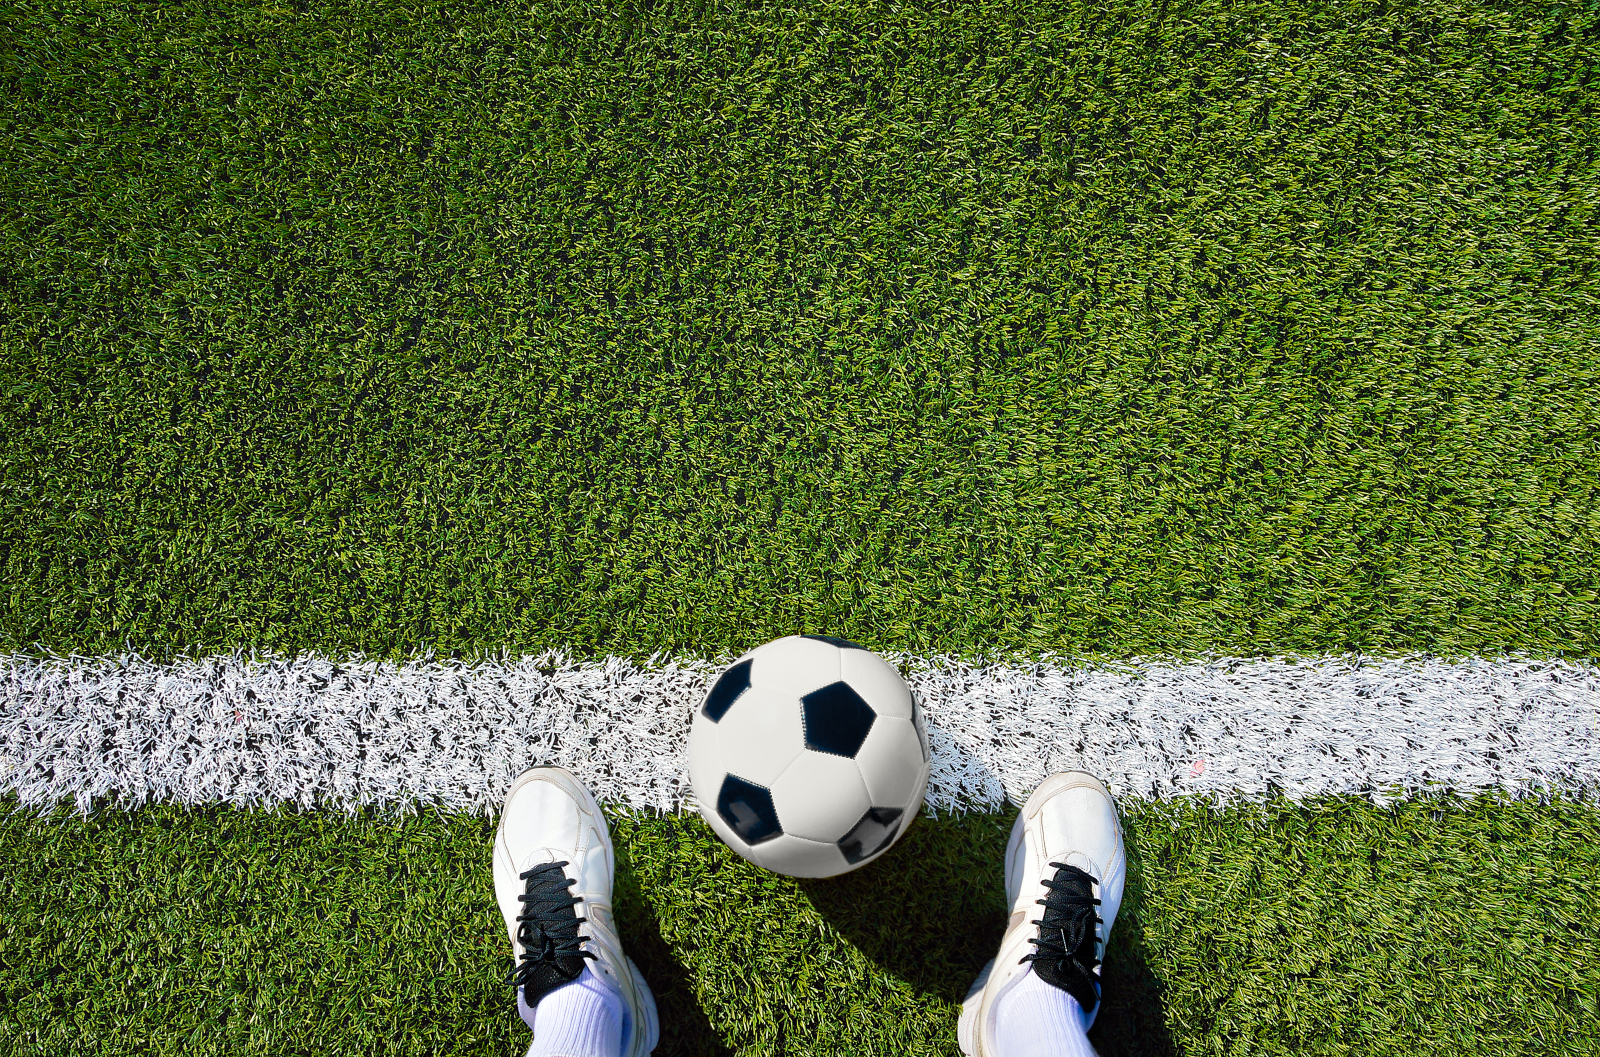 soccer ball and cleats on grass